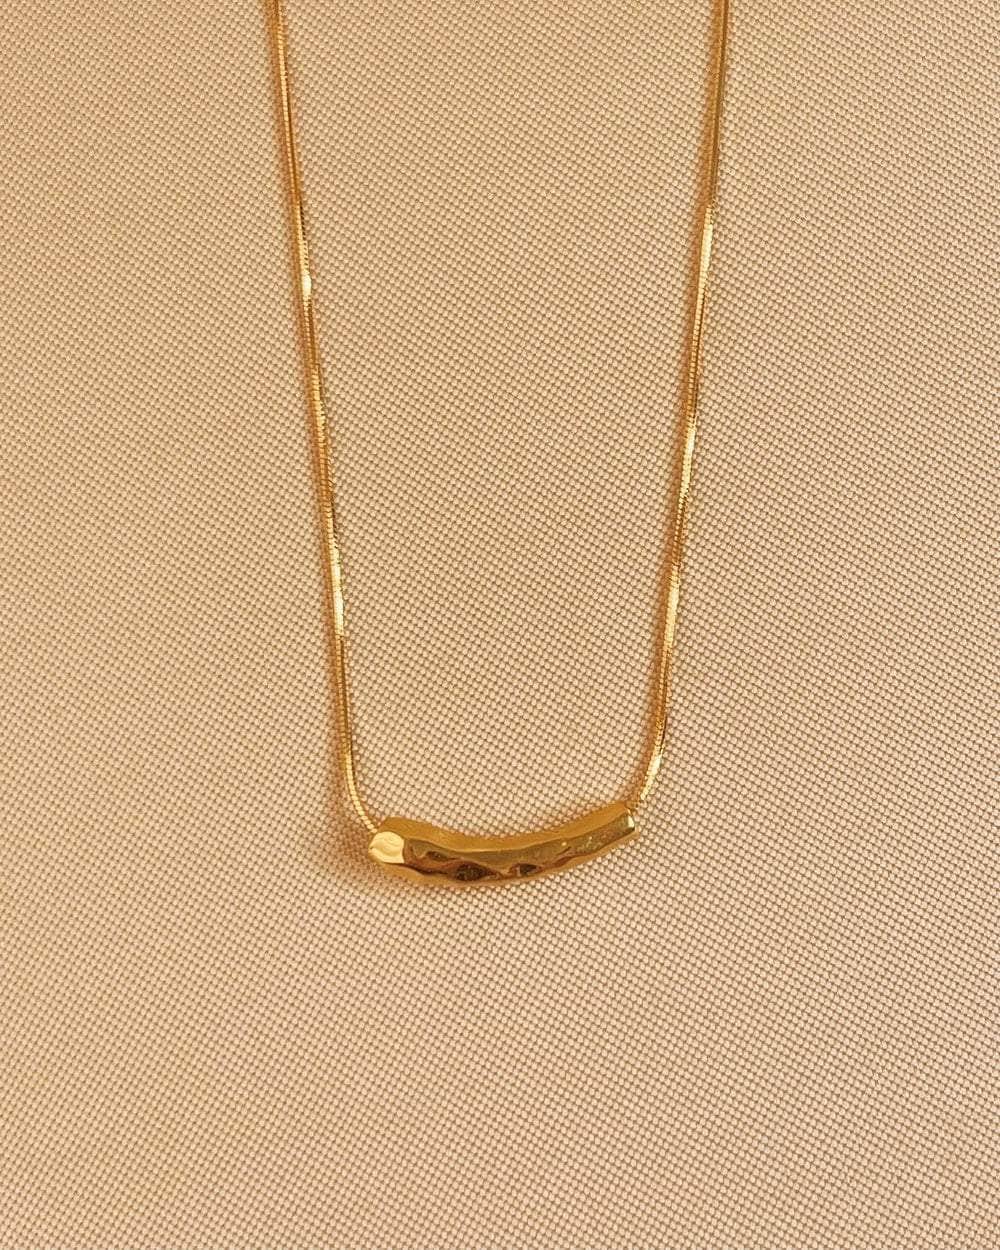 So Dainty Co. Necklaces Gabrielle Gold Necklace Gold Plated 925 Sterling Silver Jewelry